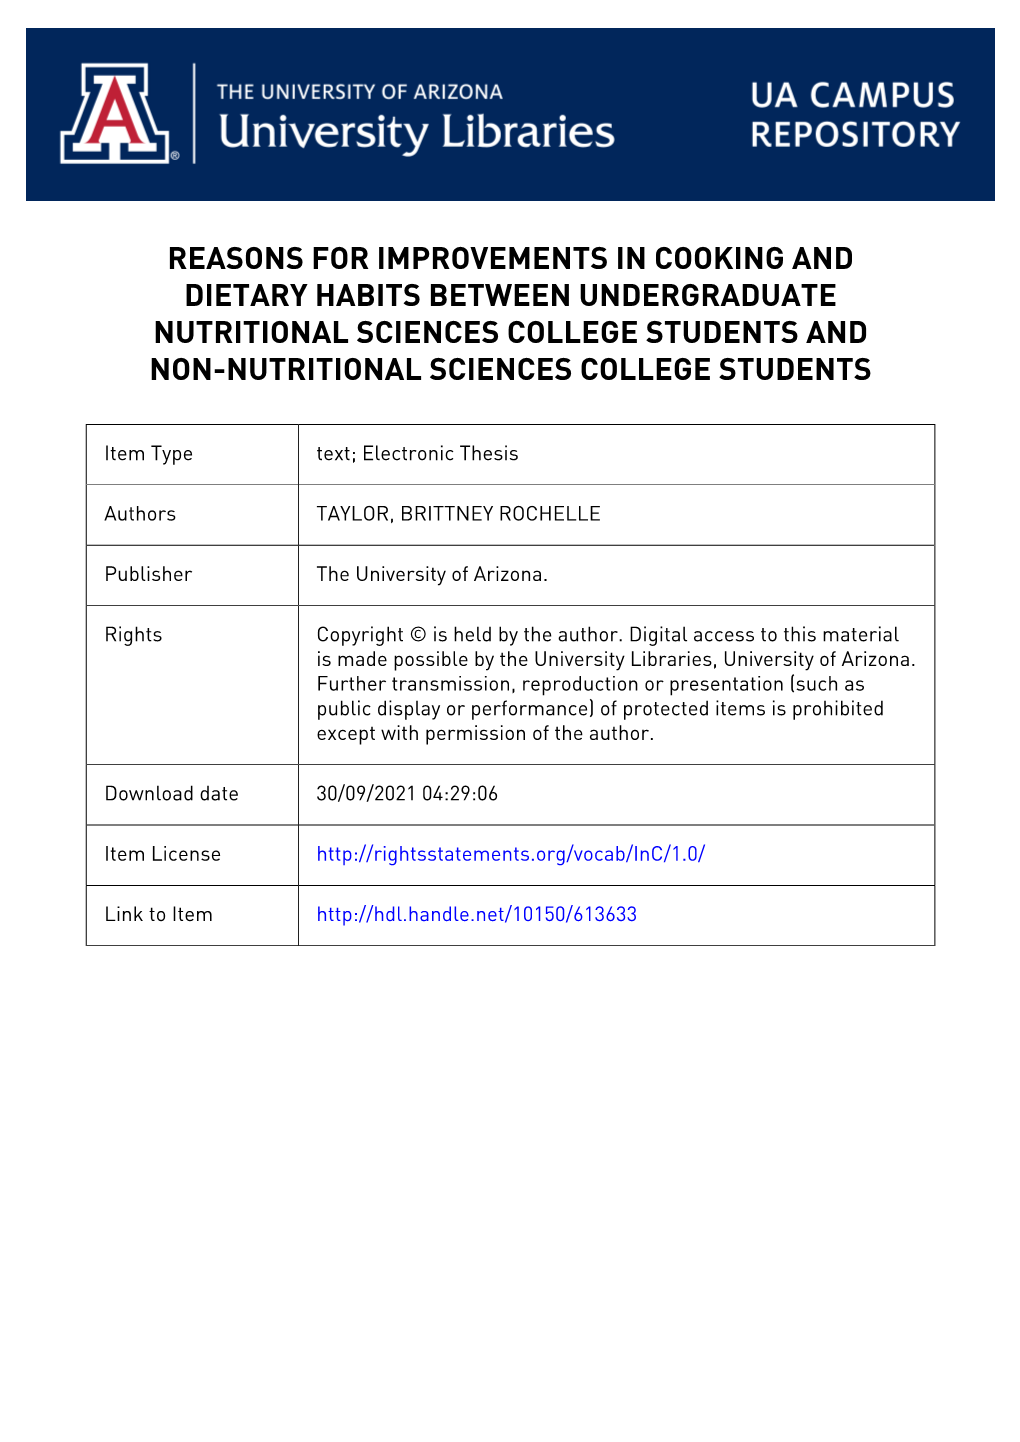 Reasons for Improvements in Cooking and Dietary Habits Between Undergraduate Nutritional Sciences College Students and Non-Nutritional Sciences College Students